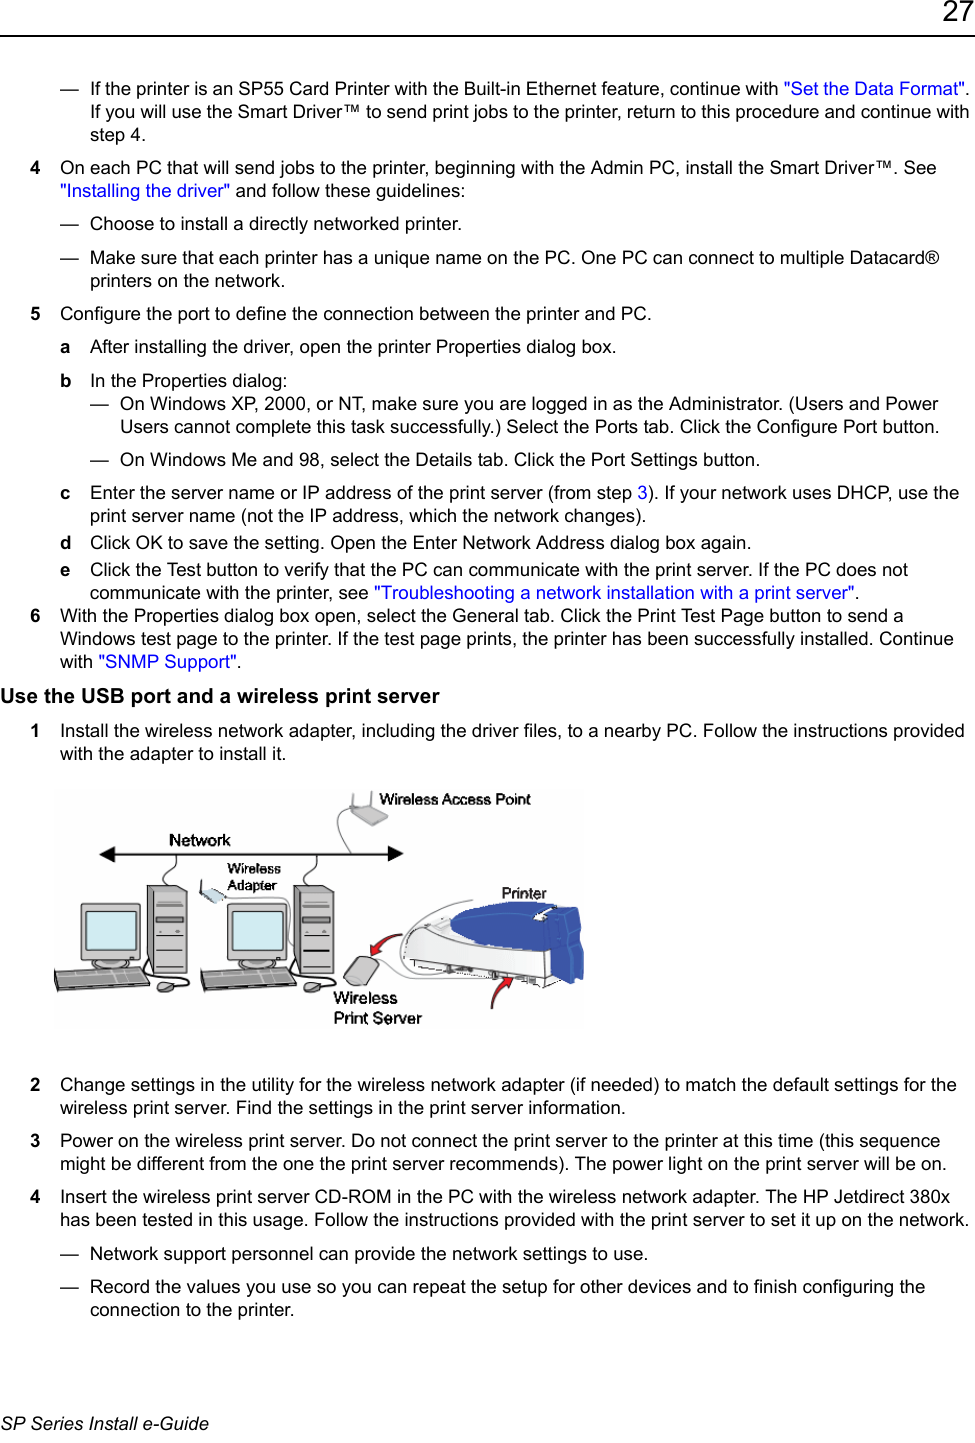 27SP Series Install e-Guide—  If the printer is an SP55 Card Printer with the Built-in Ethernet feature, continue with &quot;Set the Data Format&quot;. If you will use the Smart Driver™ to send print jobs to the printer, return to this procedure and continue with step 4. 4On each PC that will send jobs to the printer, beginning with the Admin PC, install the Smart Driver™. See &quot;Installing the driver&quot; and follow these guidelines:—  Choose to install a directly networked printer.—  Make sure that each printer has a unique name on the PC. One PC can connect to multiple Datacard® printers on the network.5Configure the port to define the connection between the printer and PC.aAfter installing the driver, open the printer Properties dialog box.bIn the Properties dialog:—  On Windows XP, 2000, or NT, make sure you are logged in as the Administrator. (Users and Power Users cannot complete this task successfully.) Select the Ports tab. Click the Configure Port button.—  On Windows Me and 98, select the Details tab. Click the Port Settings button.cEnter the server name or IP address of the print server (from step 3). If your network uses DHCP, use the print server name (not the IP address, which the network changes).dClick OK to save the setting. Open the Enter Network Address dialog box again.eClick the Test button to verify that the PC can communicate with the print server. If the PC does not communicate with the printer, see &quot;Troubleshooting a network installation with a print server&quot;.6With the Properties dialog box open, select the General tab. Click the Print Test Page button to send a Windows test page to the printer. If the test page prints, the printer has been successfully installed. Continue with &quot;SNMP Support&quot;.Use the USB port and a wireless print server 1Install the wireless network adapter, including the driver files, to a nearby PC. Follow the instructions provided with the adapter to install it. 2Change settings in the utility for the wireless network adapter (if needed) to match the default settings for the wireless print server. Find the settings in the print server information.3Power on the wireless print server. Do not connect the print server to the printer at this time (this sequence might be different from the one the print server recommends). The power light on the print server will be on.4Insert the wireless print server CD-ROM in the PC with the wireless network adapter. The HP Jetdirect 380x has been tested in this usage. Follow the instructions provided with the print server to set it up on the network. —  Network support personnel can provide the network settings to use.—  Record the values you use so you can repeat the setup for other devices and to finish configuring the connection to the printer.